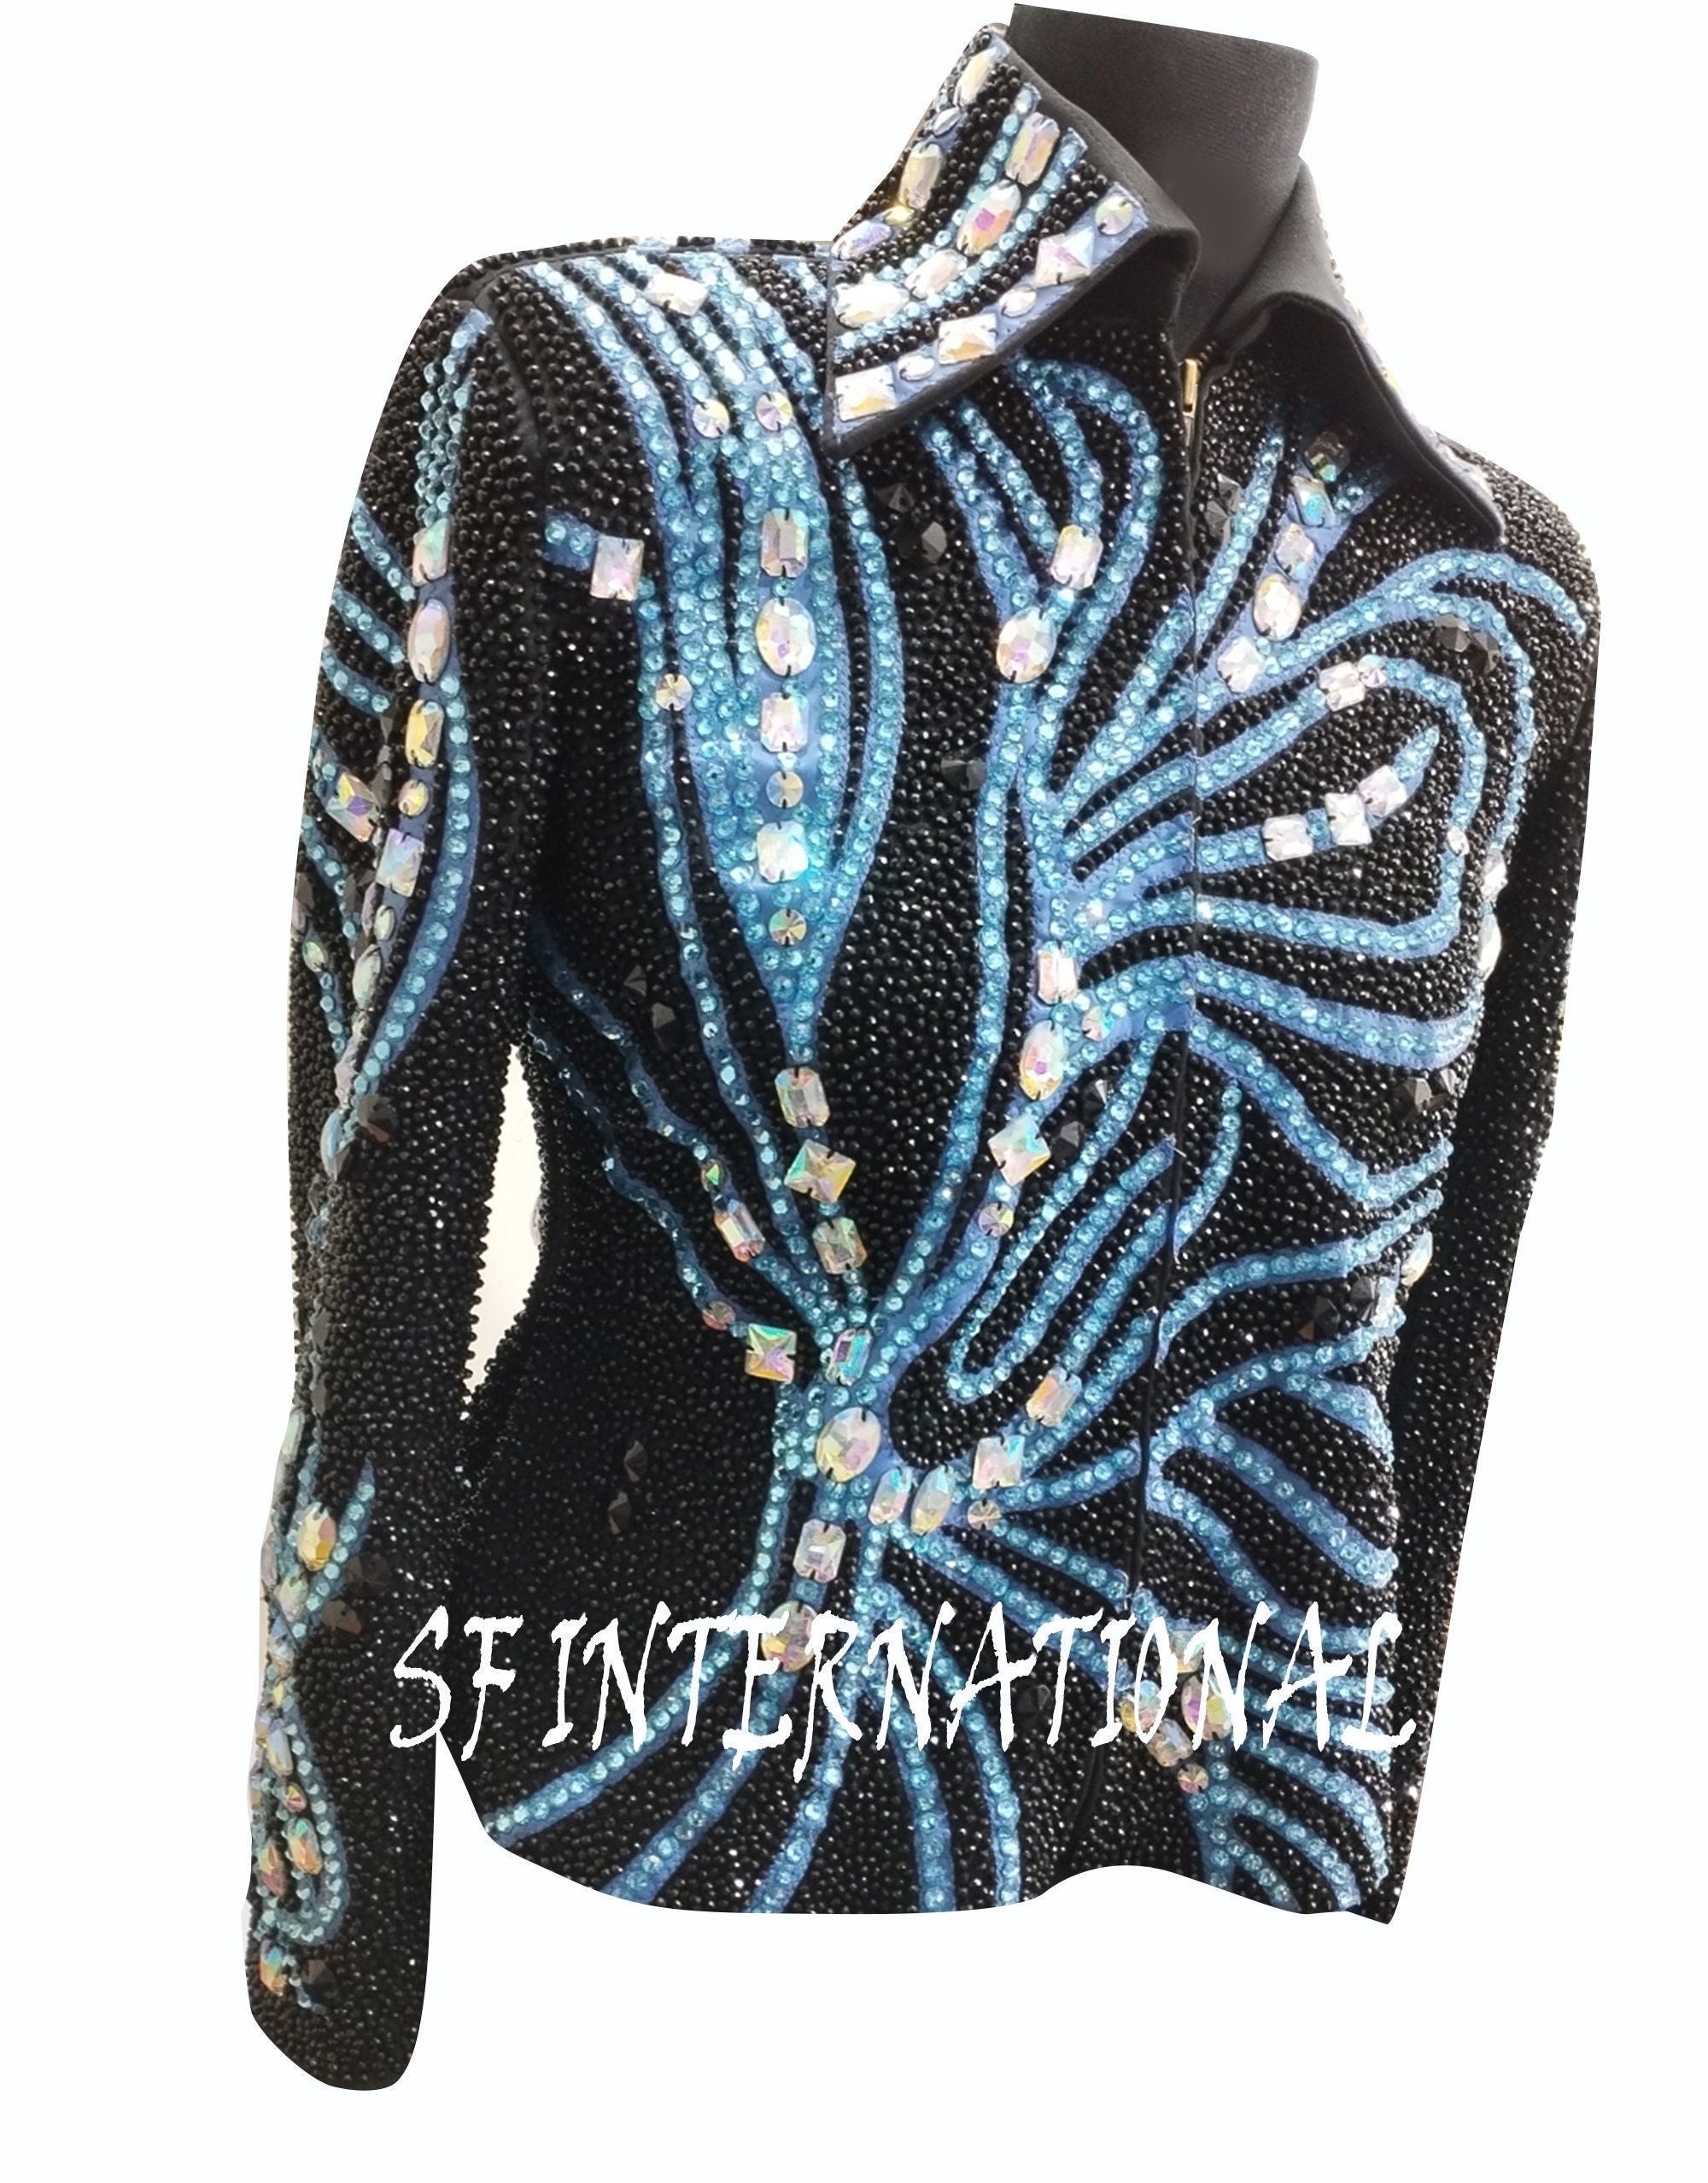 Showmanship Jacket for Women Western Show Clothes - Etsy